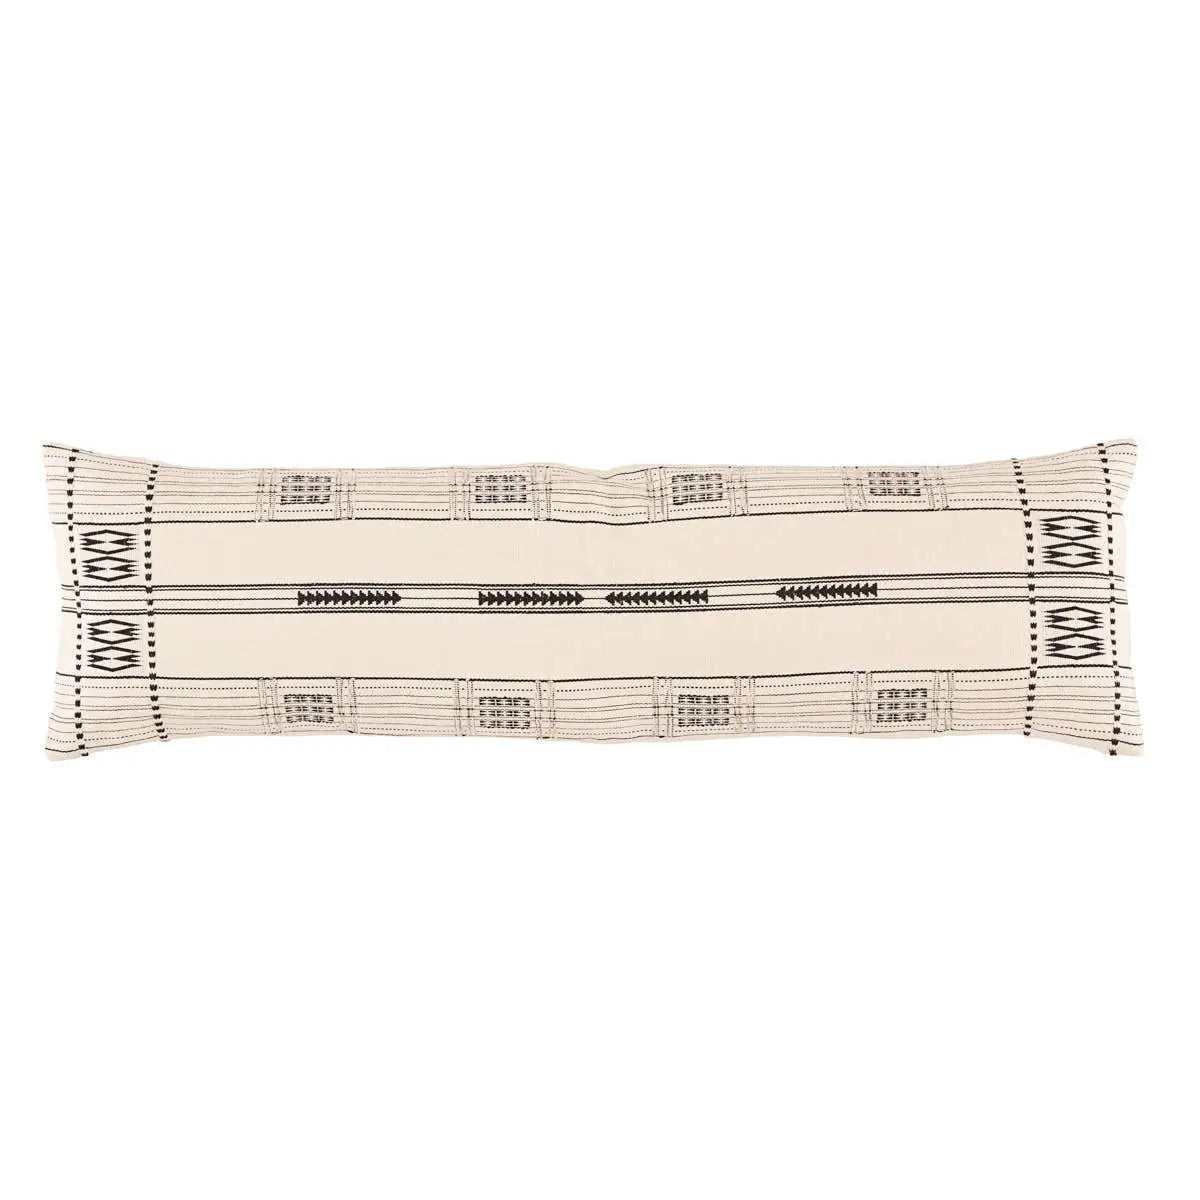 The Nagaland Zeliang Pillow showcases the traditional loin-loom techniques of the indigenous tribes of the region. The artisan-made Zeliang long lumbar pillow effortlessly combines heritage-rich tribal patterns a versatile, contemporary colorway for a stunning statement in any space. Amethyst Home provides interior design services, furniture, rugs, and lighting in the Des Moines metro area.